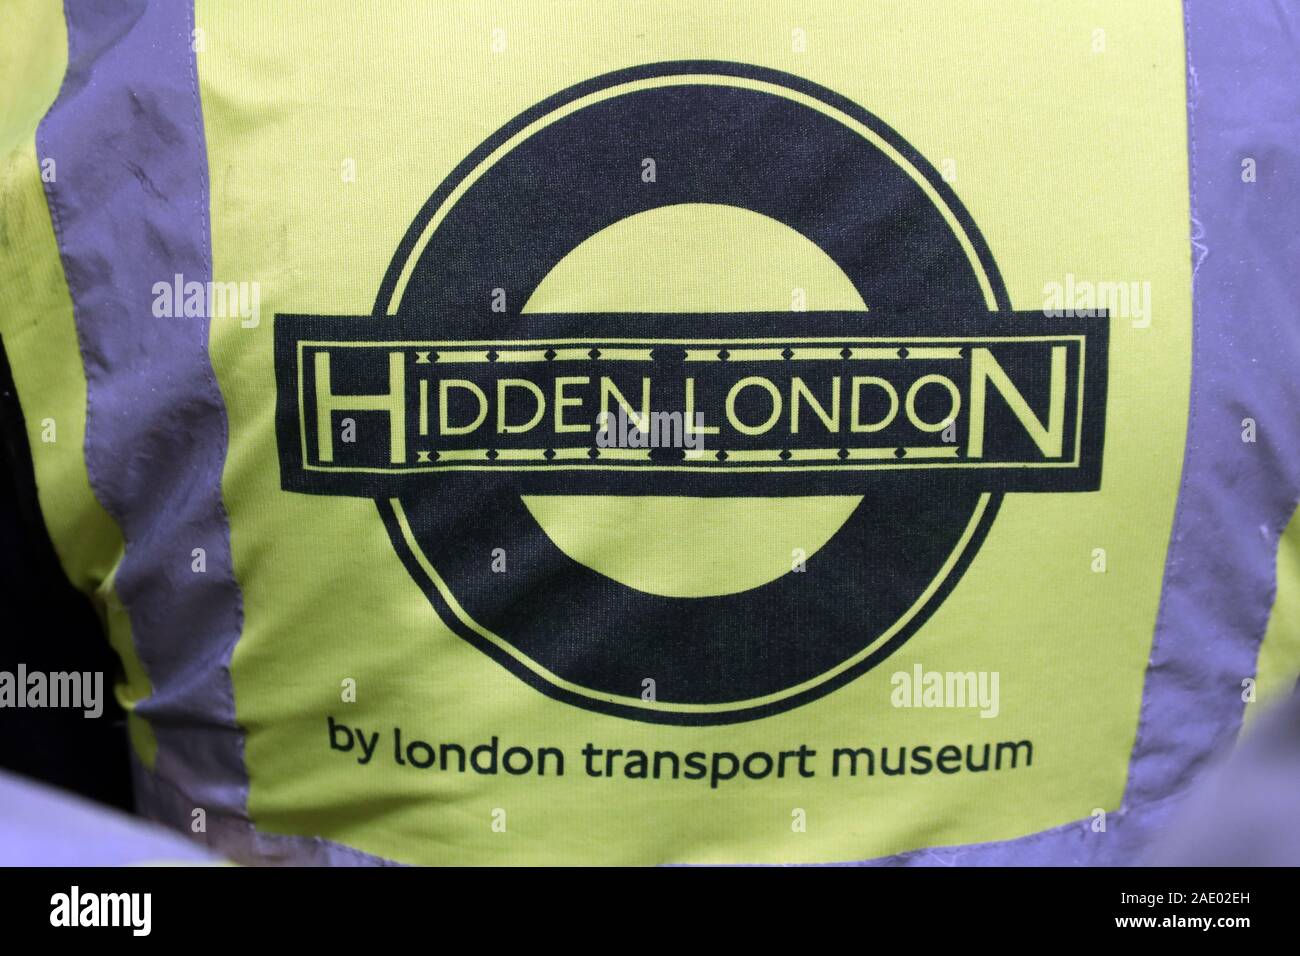 Hidden London Guide,by The London Transport Museum, on a tour, Piccadilly Circus tube station,West End, London,England,UK Stock Photo